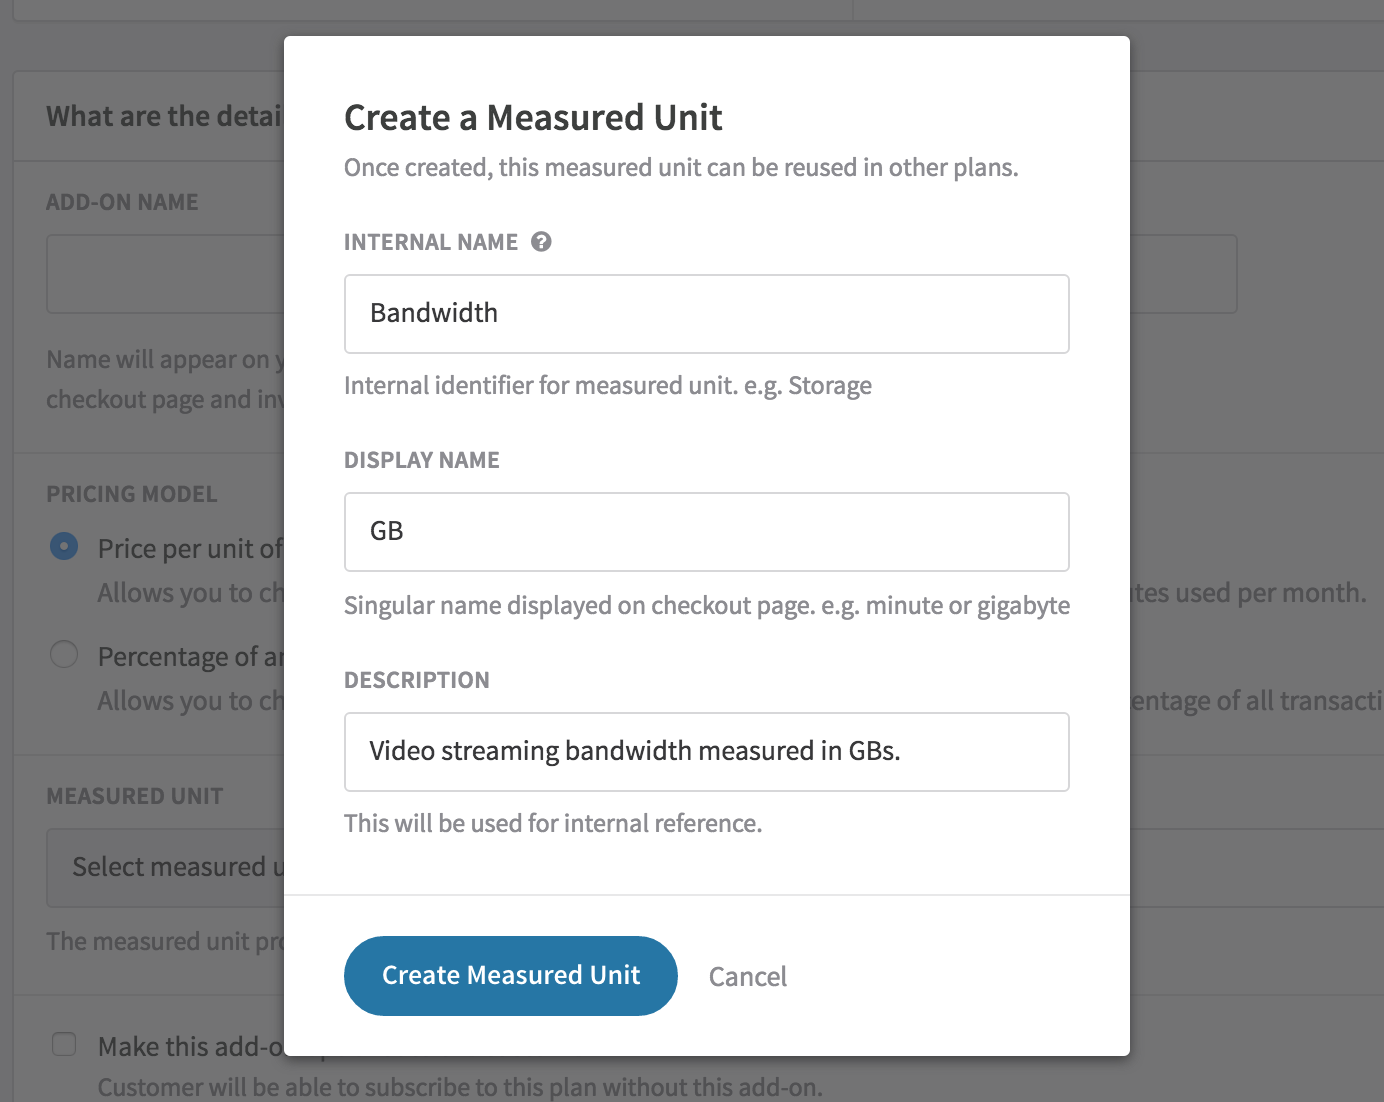 Create a Measured Unit when Creating an Add-on